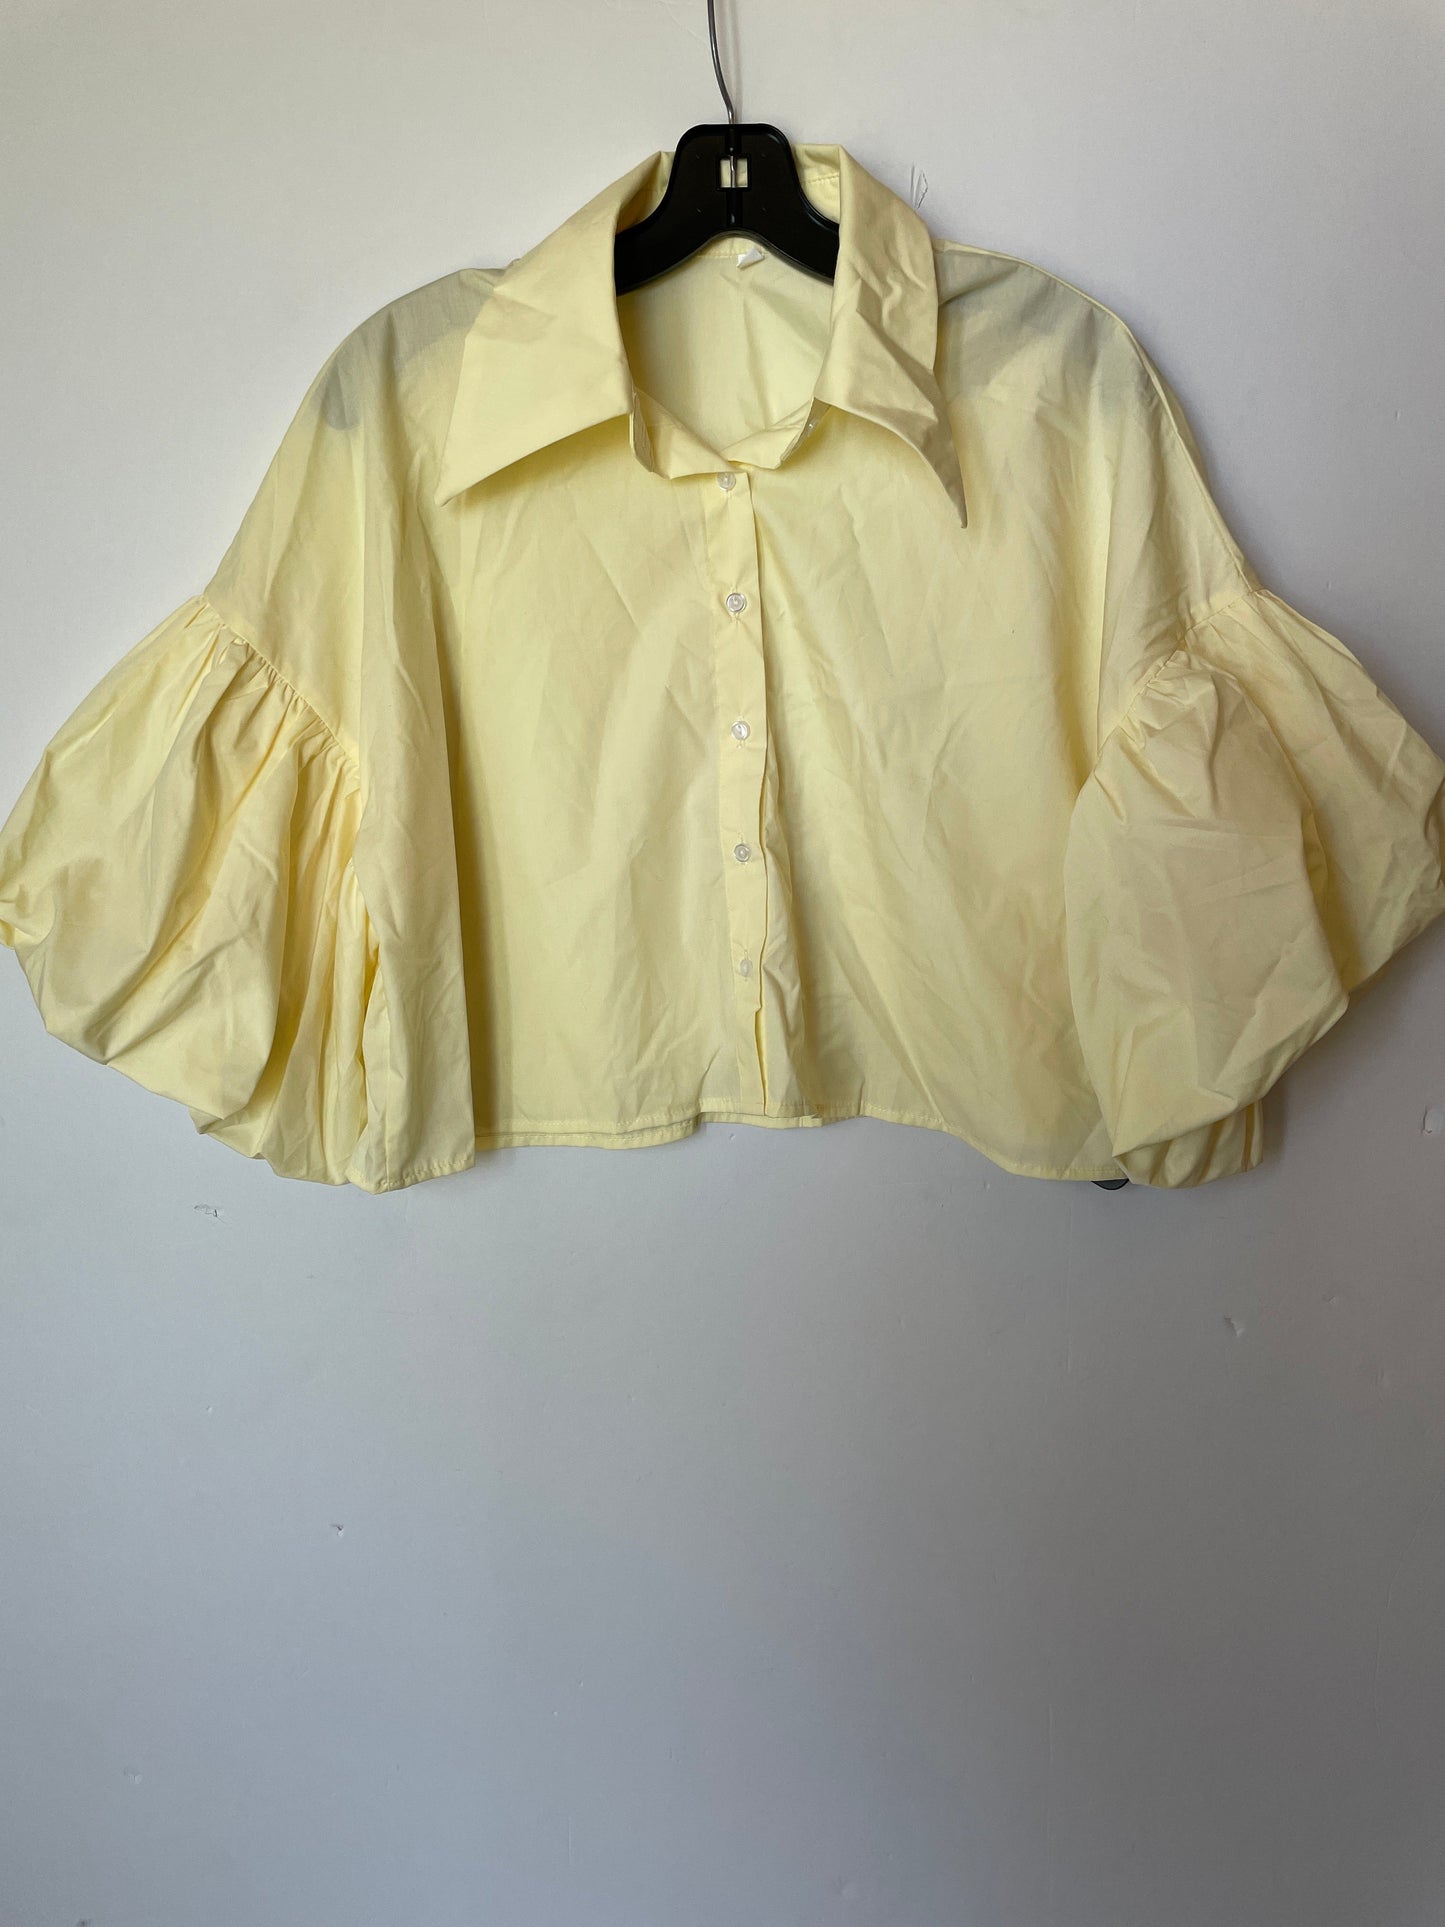 Yellow Top Short Sleeve Clothes Mentor, Size M